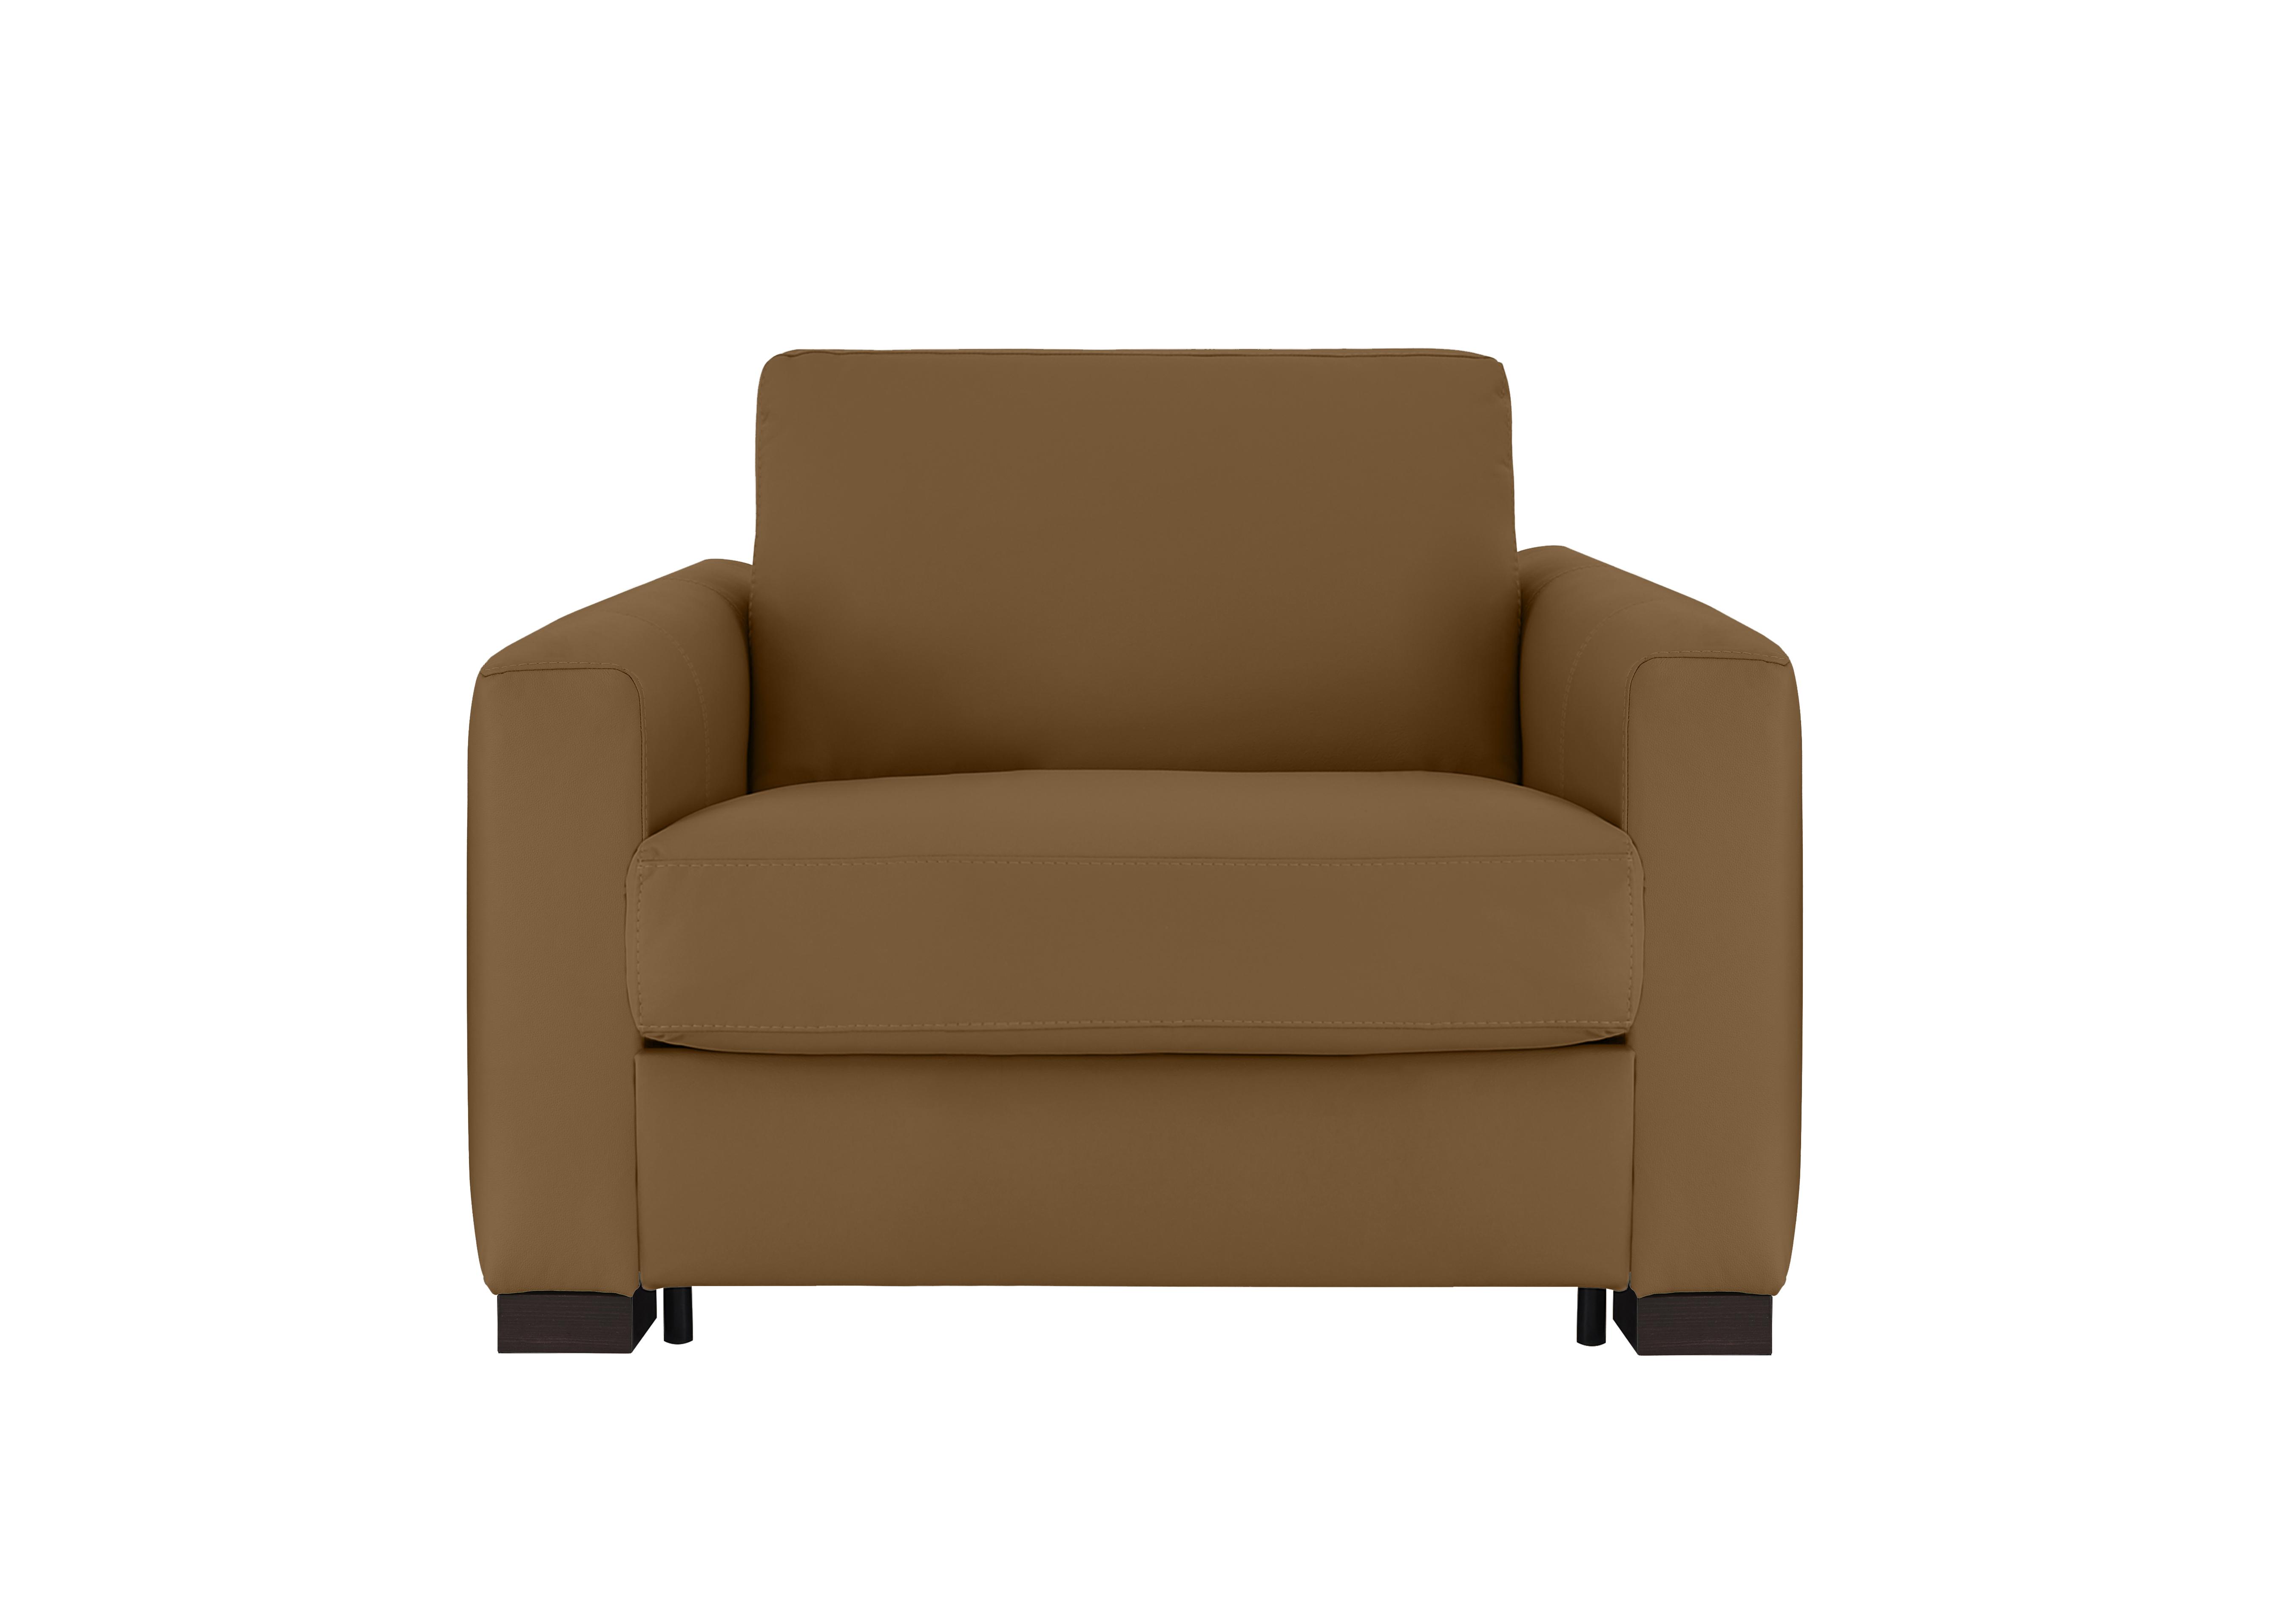 Alcova Leather Chair Sofa Bed with Box Arms in Botero Cuoio 2151 on Furniture Village